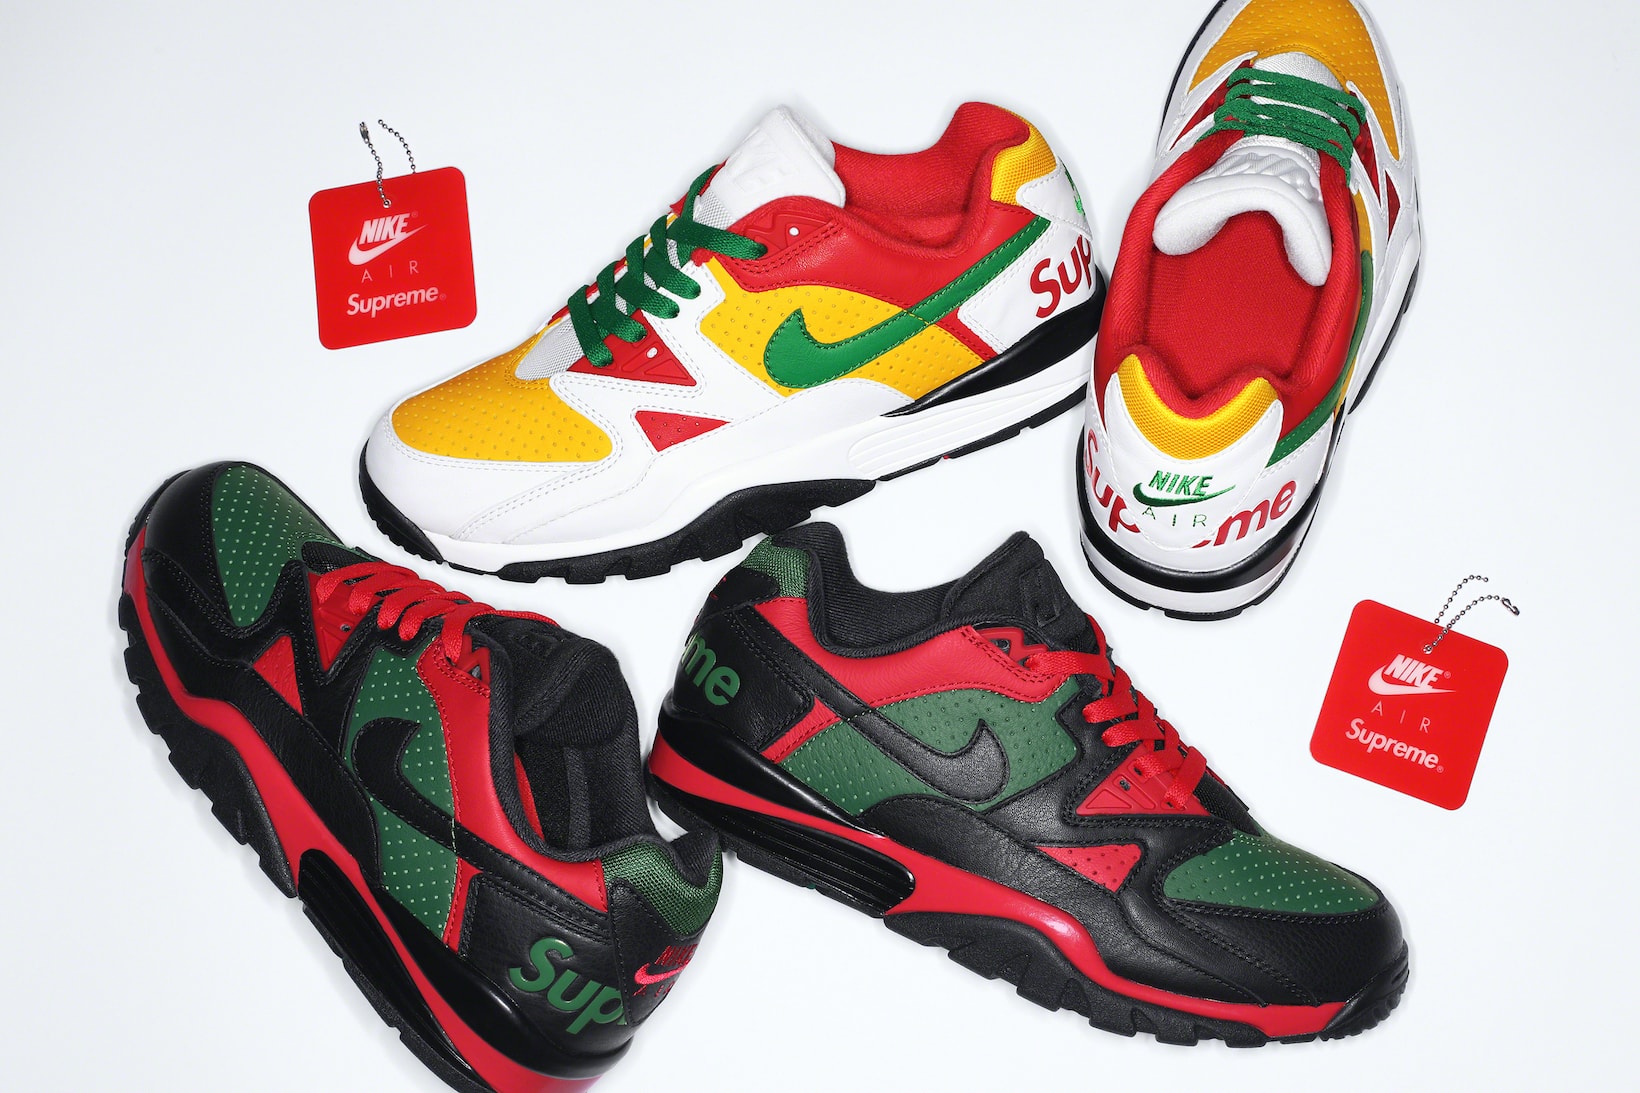 Supreme Nike Cross Trainer Low Sneakers Footwear Shoes Kicks Collaboration Black Red Green White Yellow